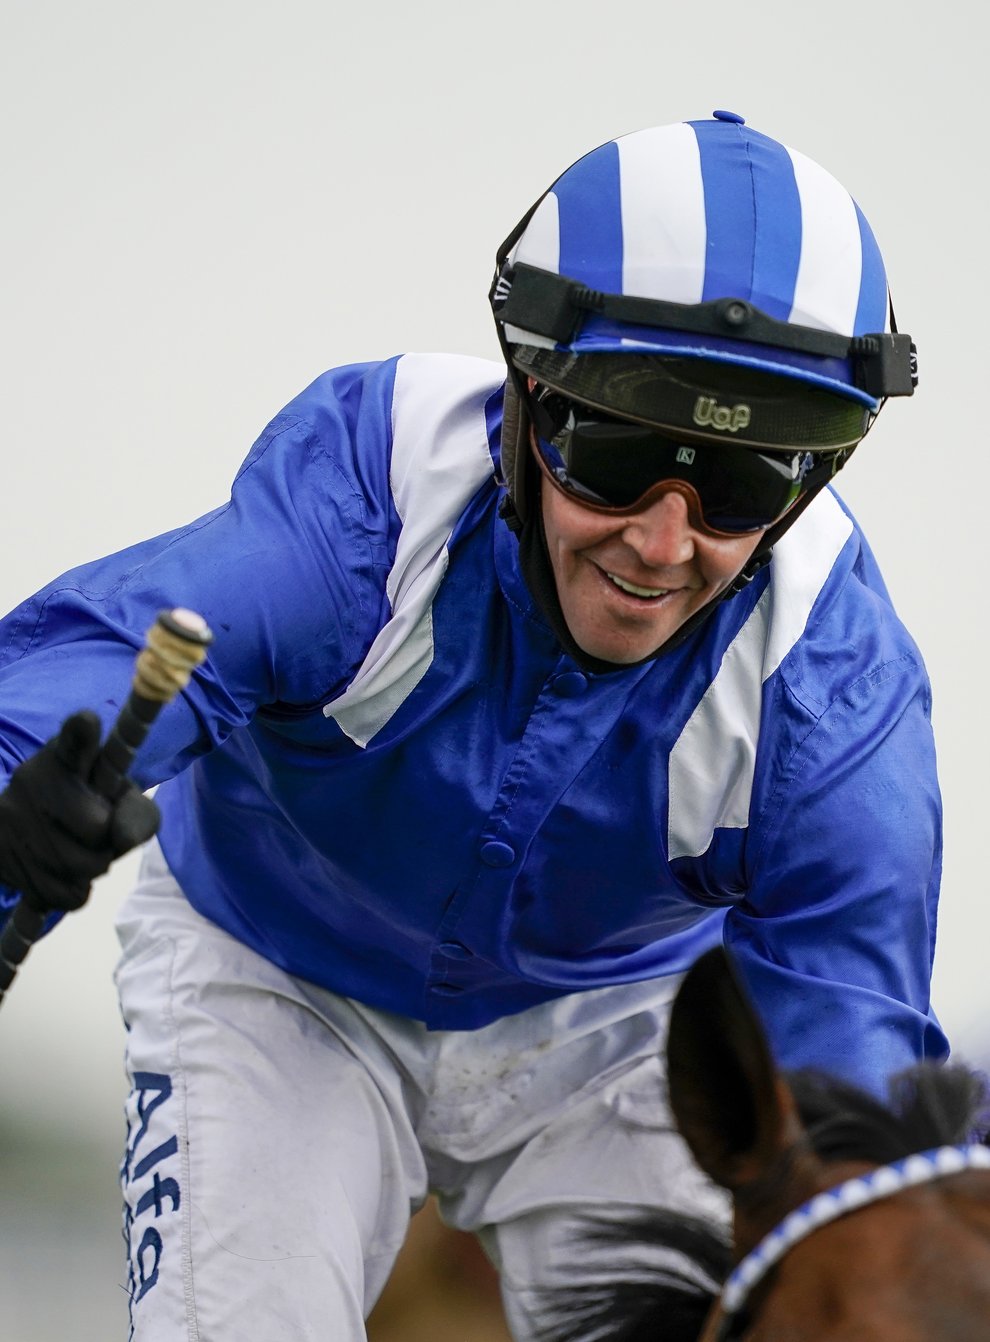 Jim Crowley formed a special alliance with Battaash (Alan Crowhurst/PA)